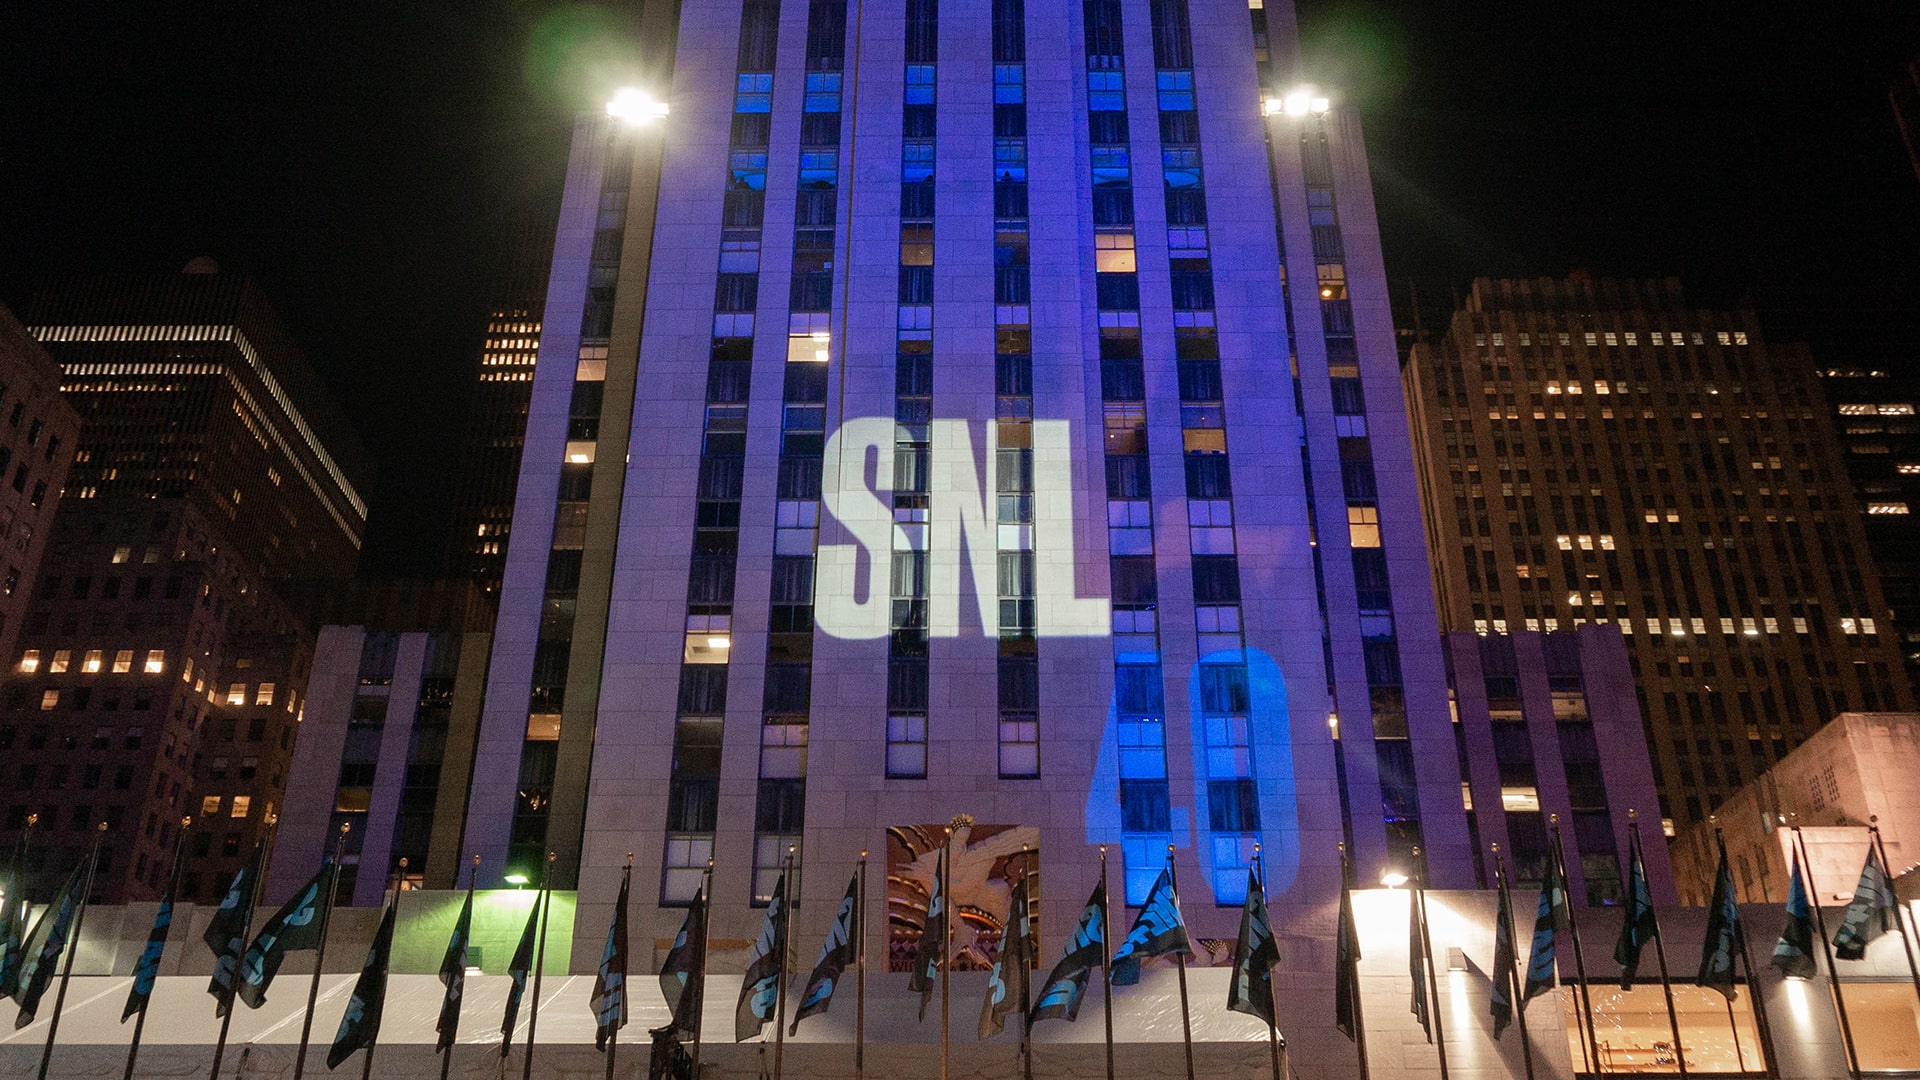 30 Rock Saturday Night Live 40th Anniversary. Anthony Quintano, Wiki Commons.